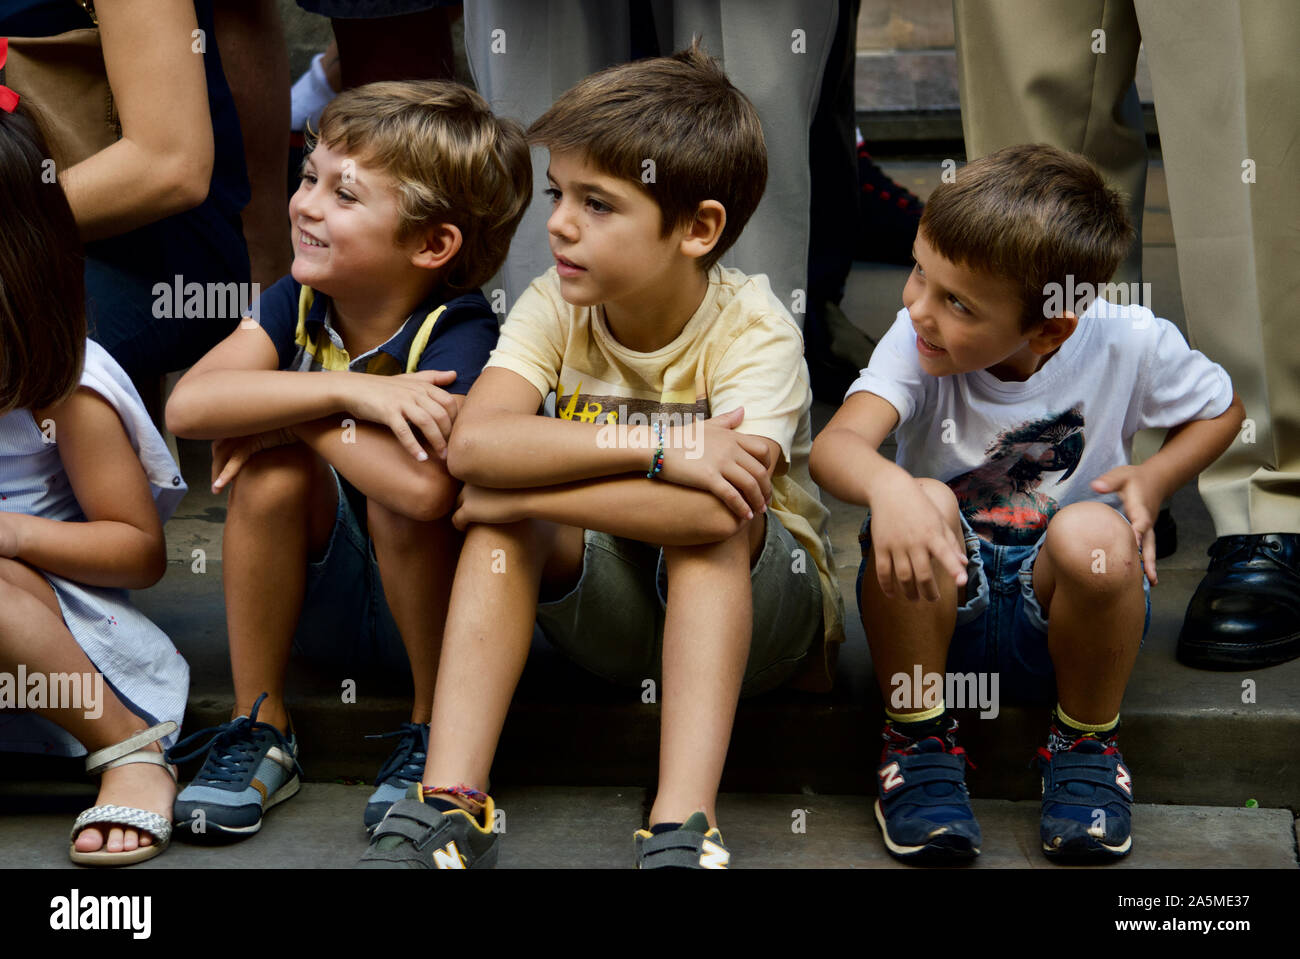 Kids watching the Giants Parade during La Merce Festival 2019 at Placa de Sant Jaume in Barcelona, Spain Stock Photo